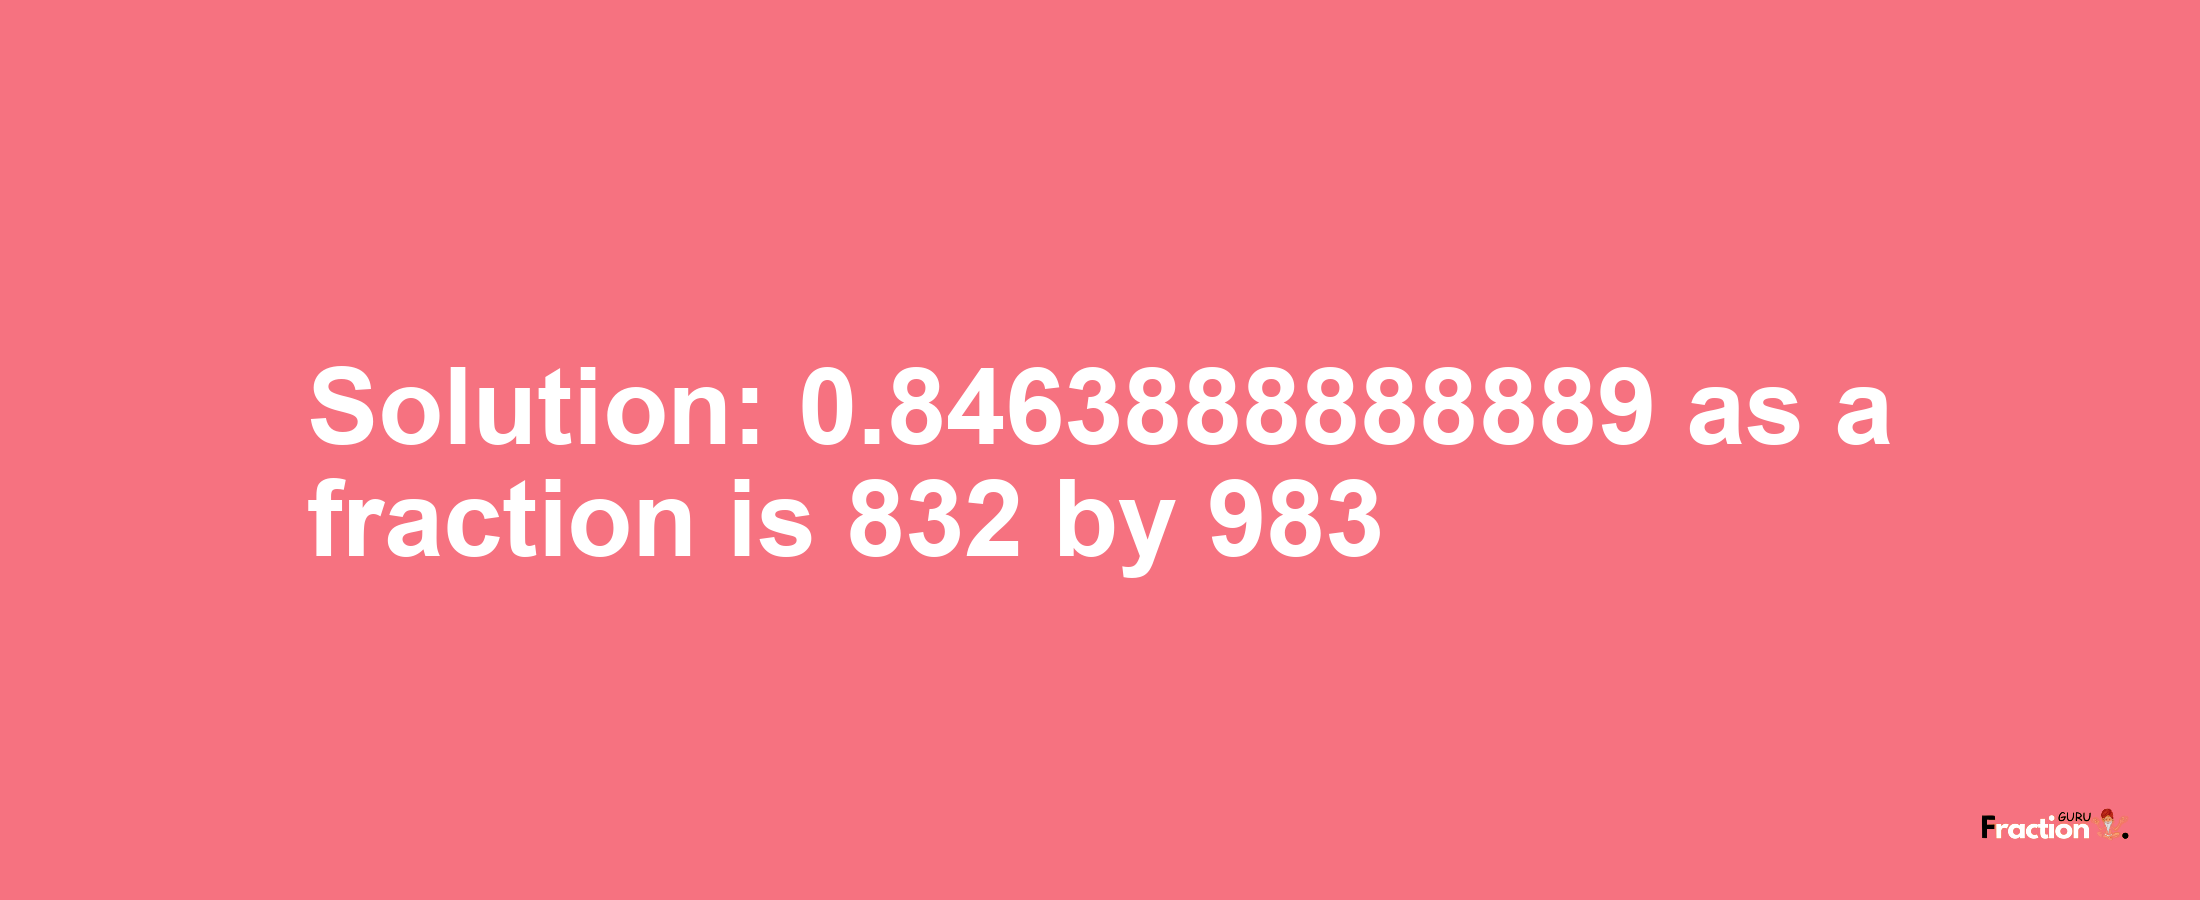 Solution:0.8463888888889 as a fraction is 832/983